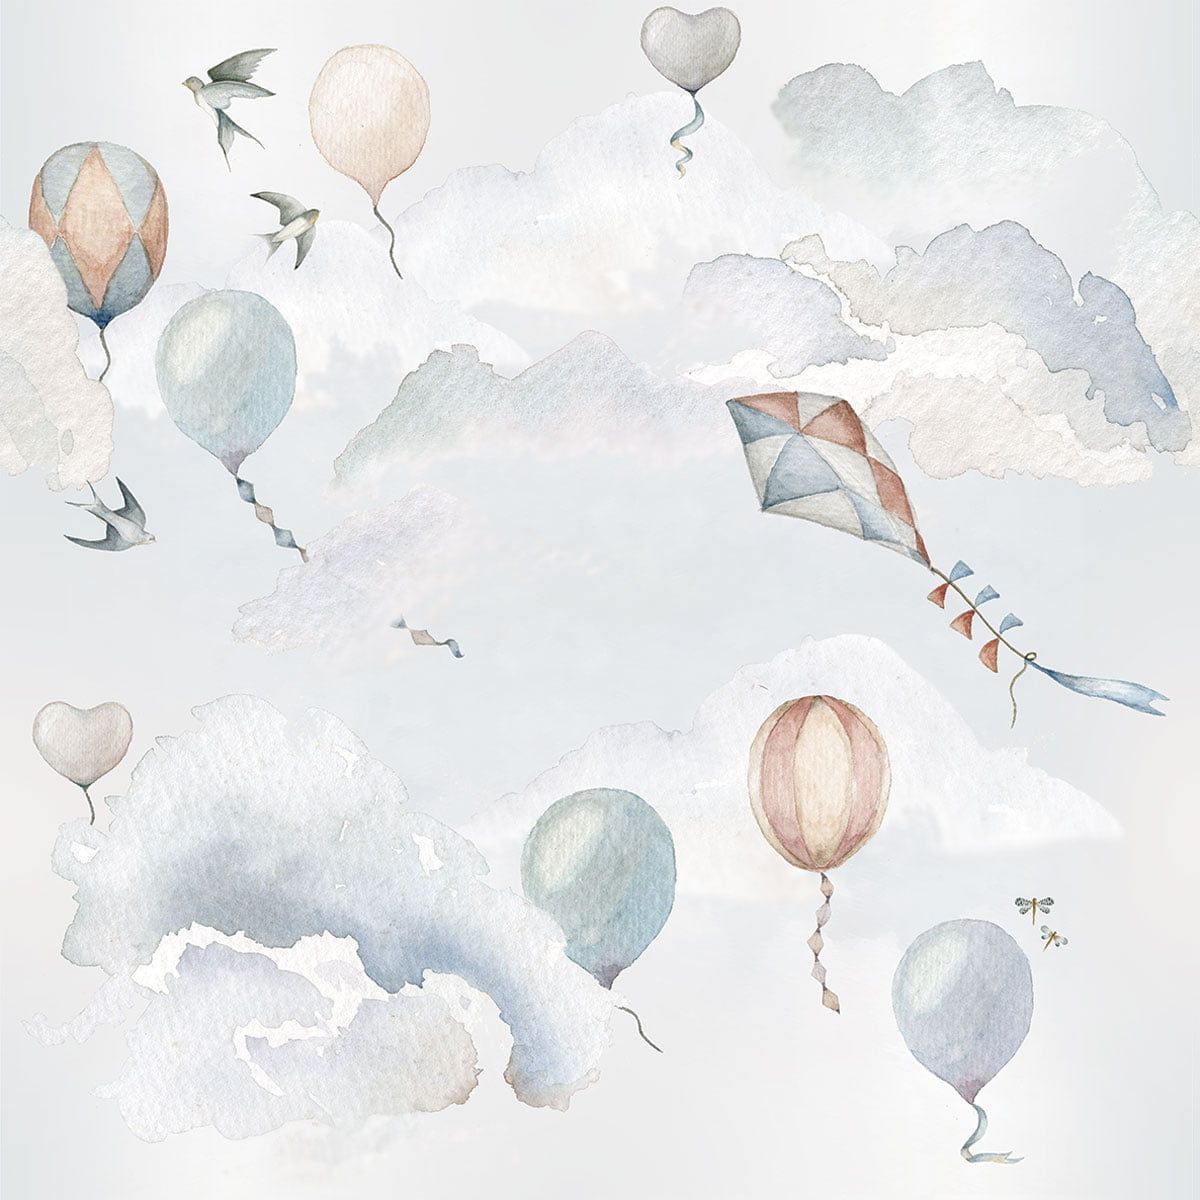 Balloons Fairytale Wallpaper.com Wallstickers And Wallpaper Online Store